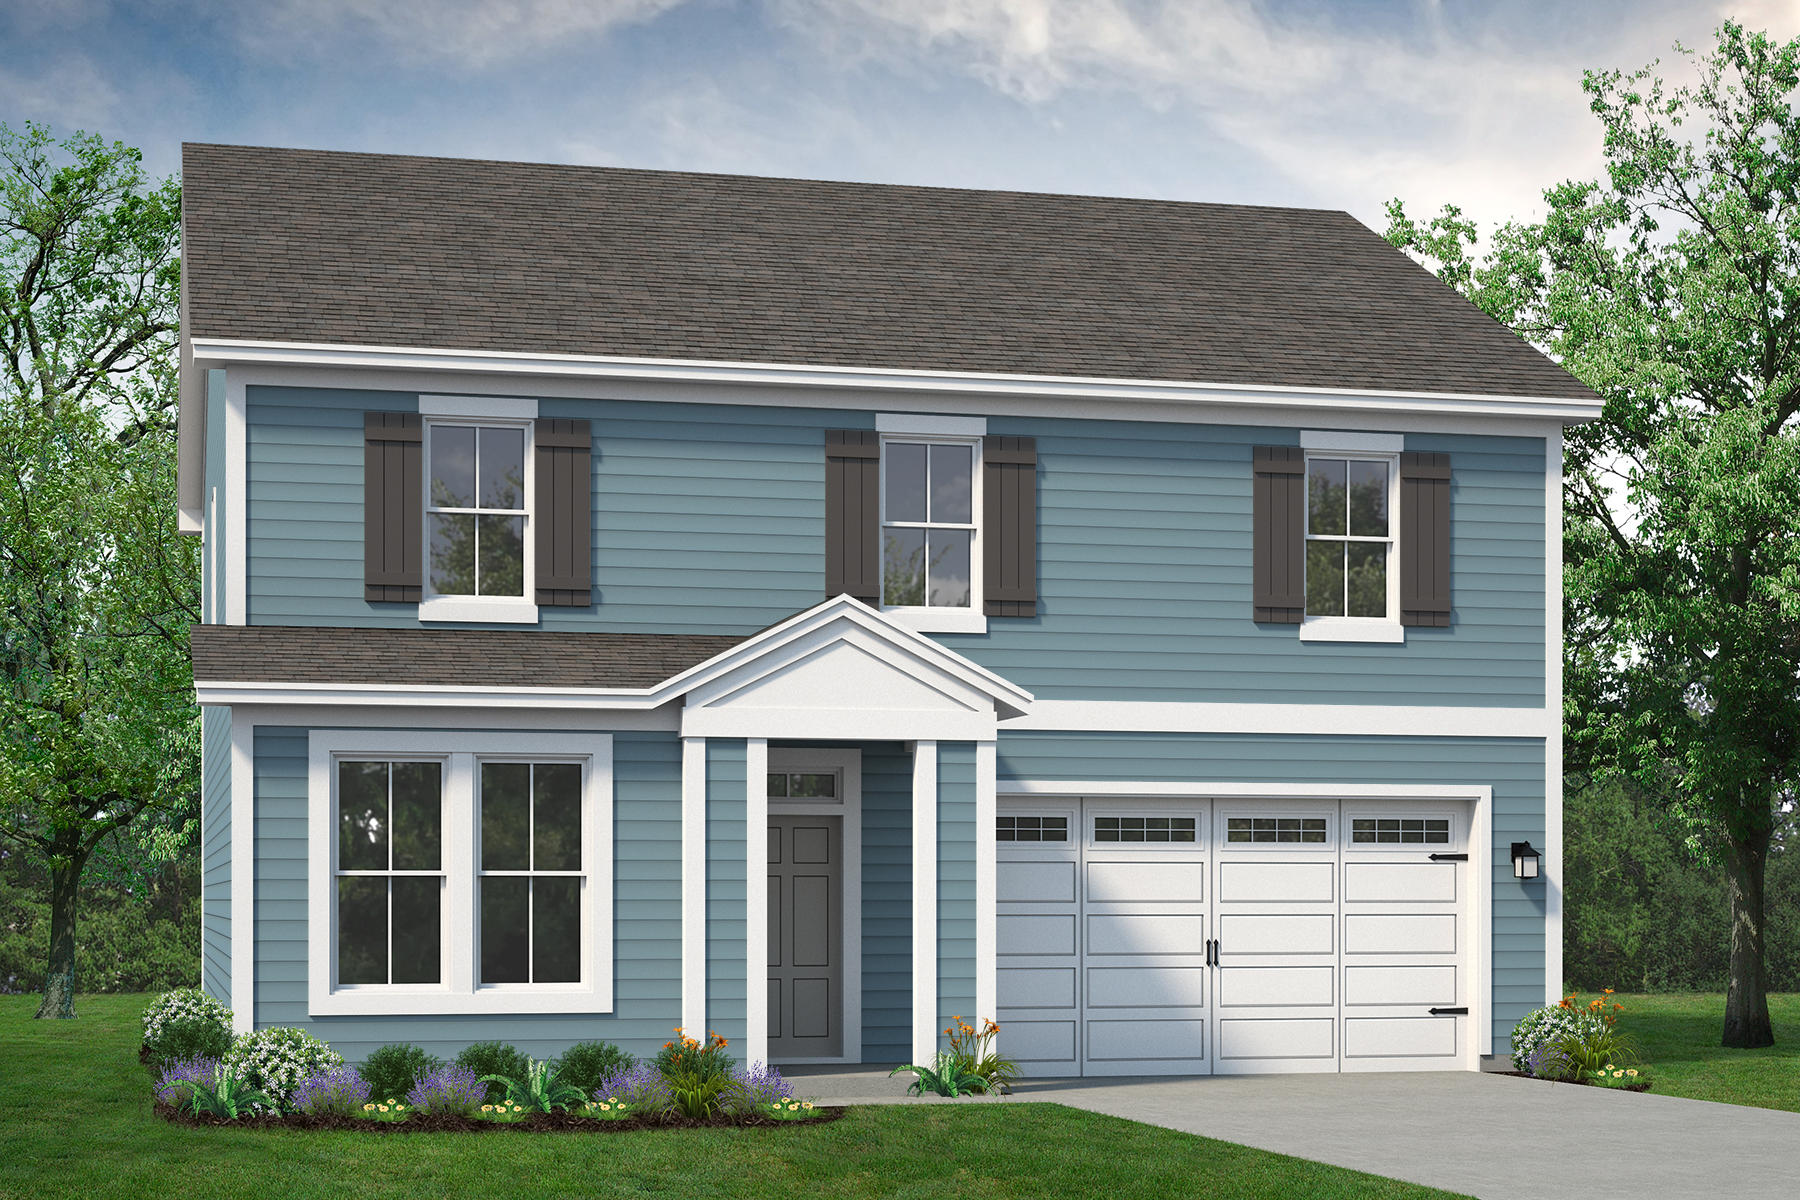 Elevation B. 2,427sf New Home in Lillington, NC